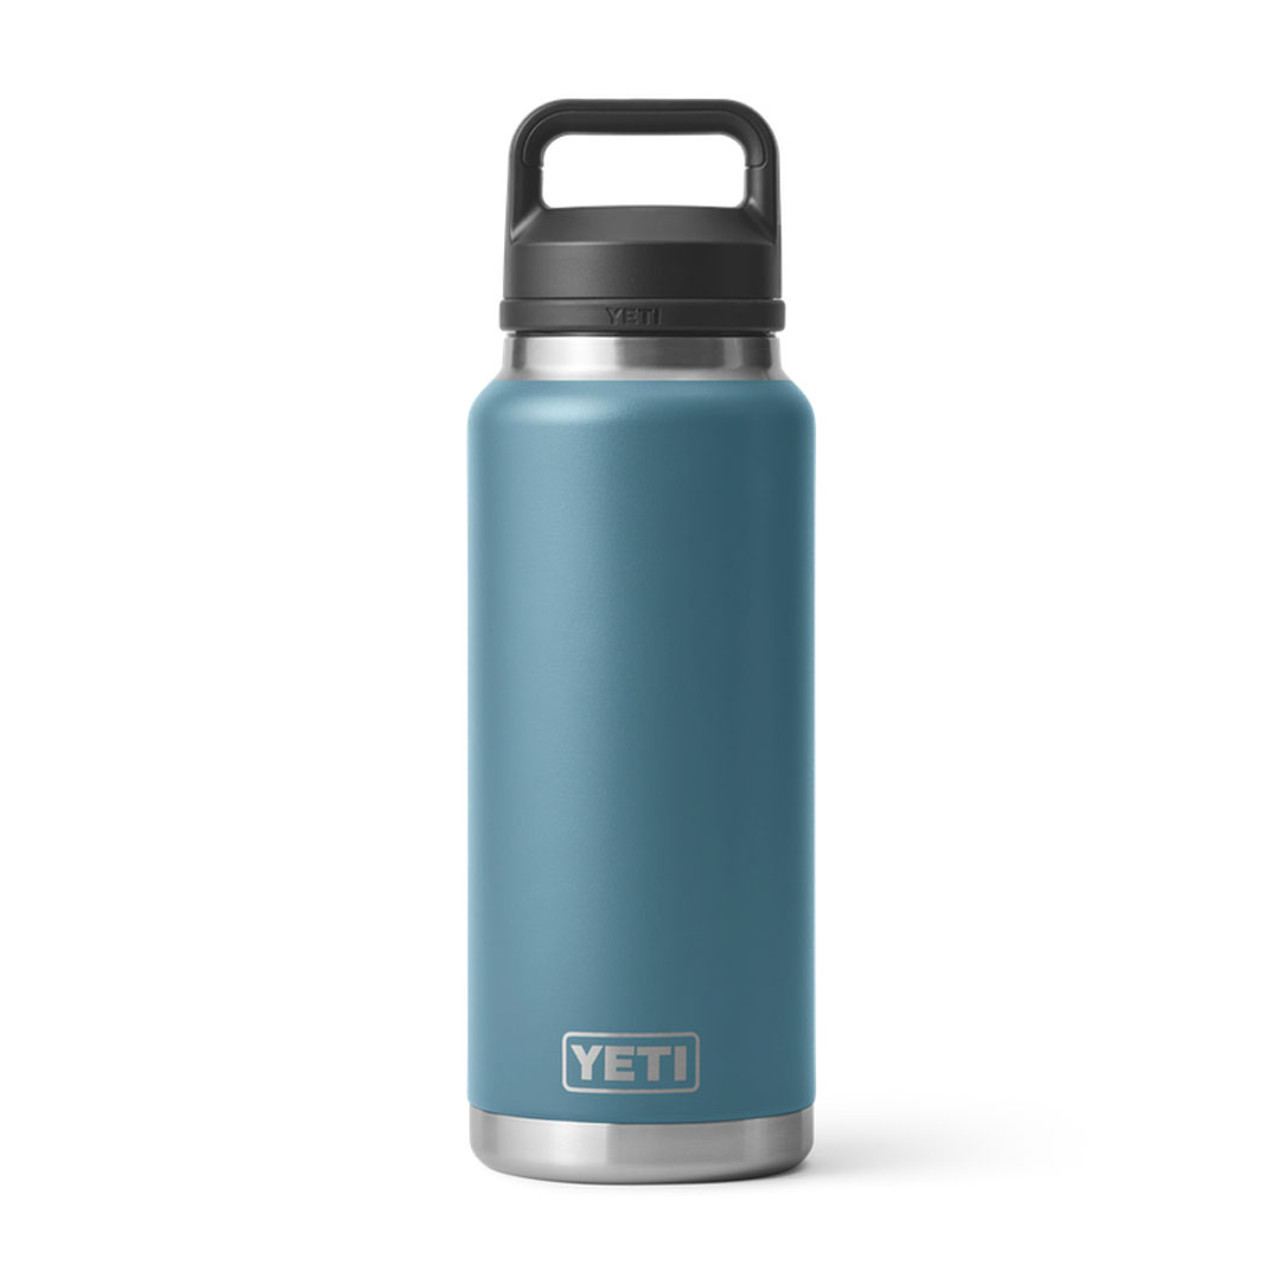 https://cdn11.bigcommerce.com/s-ppsyskcavg/images/stencil/1280x1280/products/59466/197165/W-site_studio_Drinkware_Rambler_36oz_Bottle_Nordic_Blue_Front_4082_F_Primary_B_2400x2400__62474.1657564620.jpg?c=2?imbypass=on